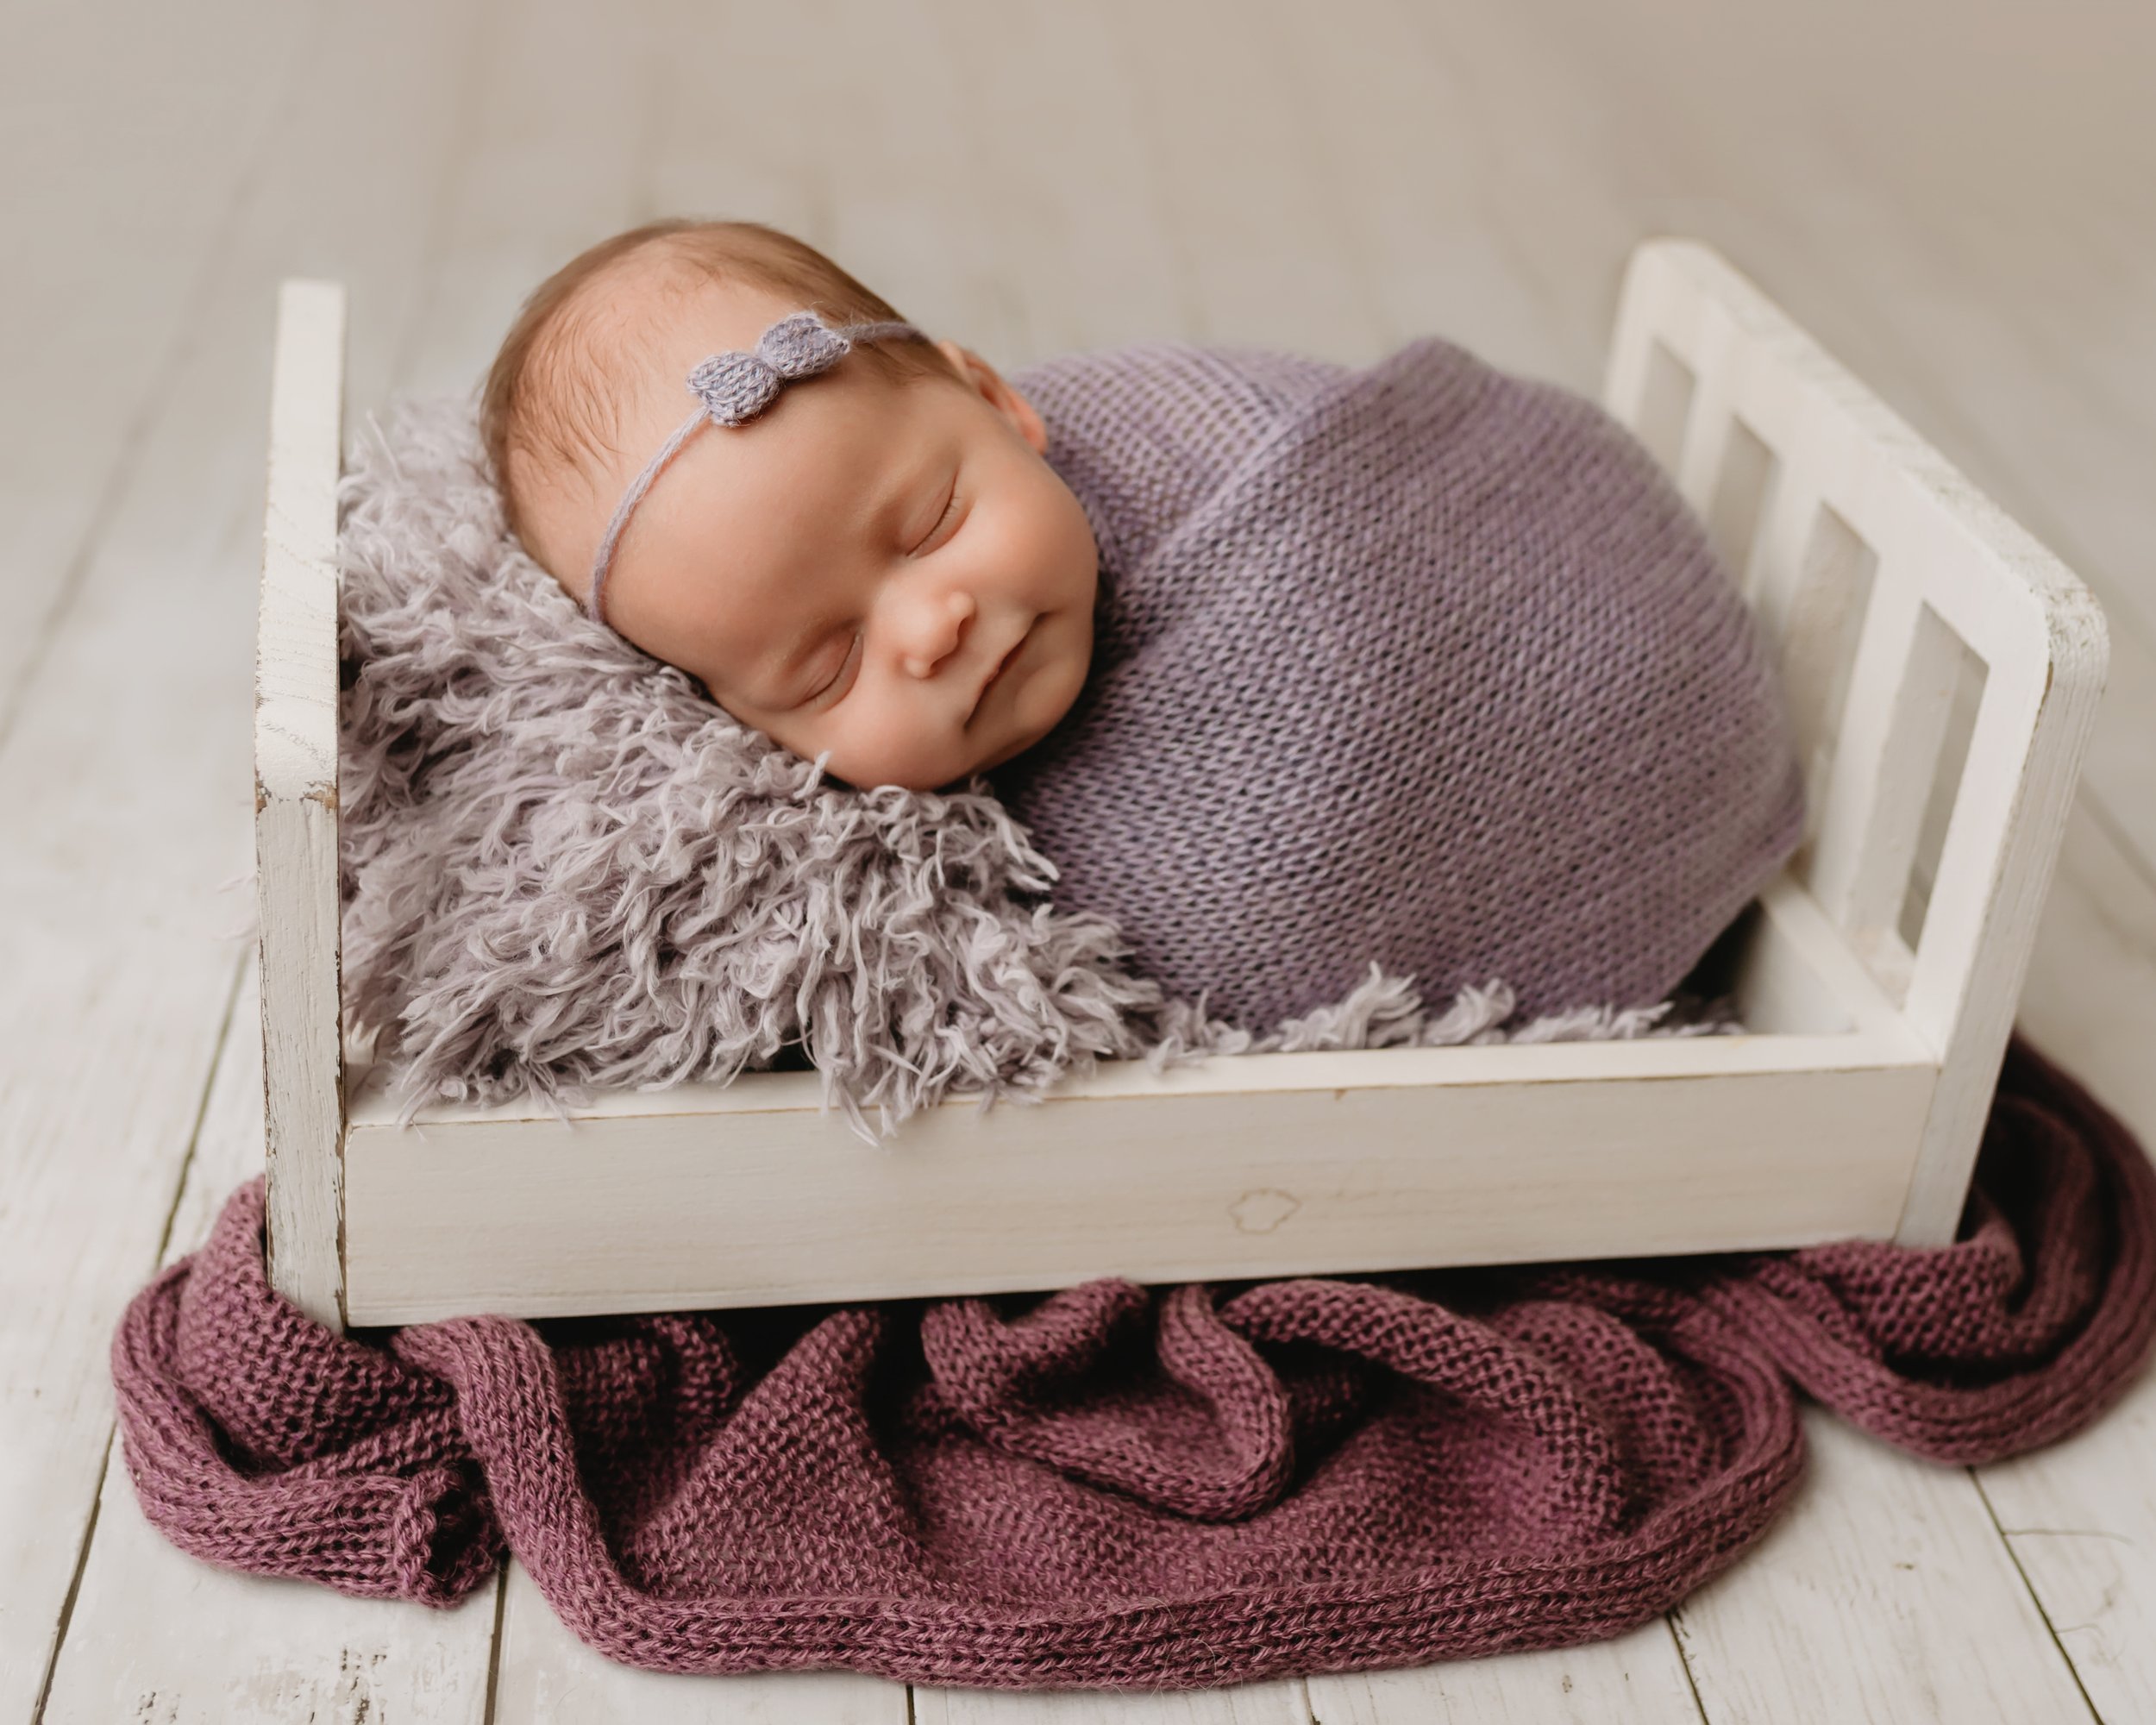 Boca-Raton-Newborn-Photographer-Baby-in-purple-wrapped-in-bed